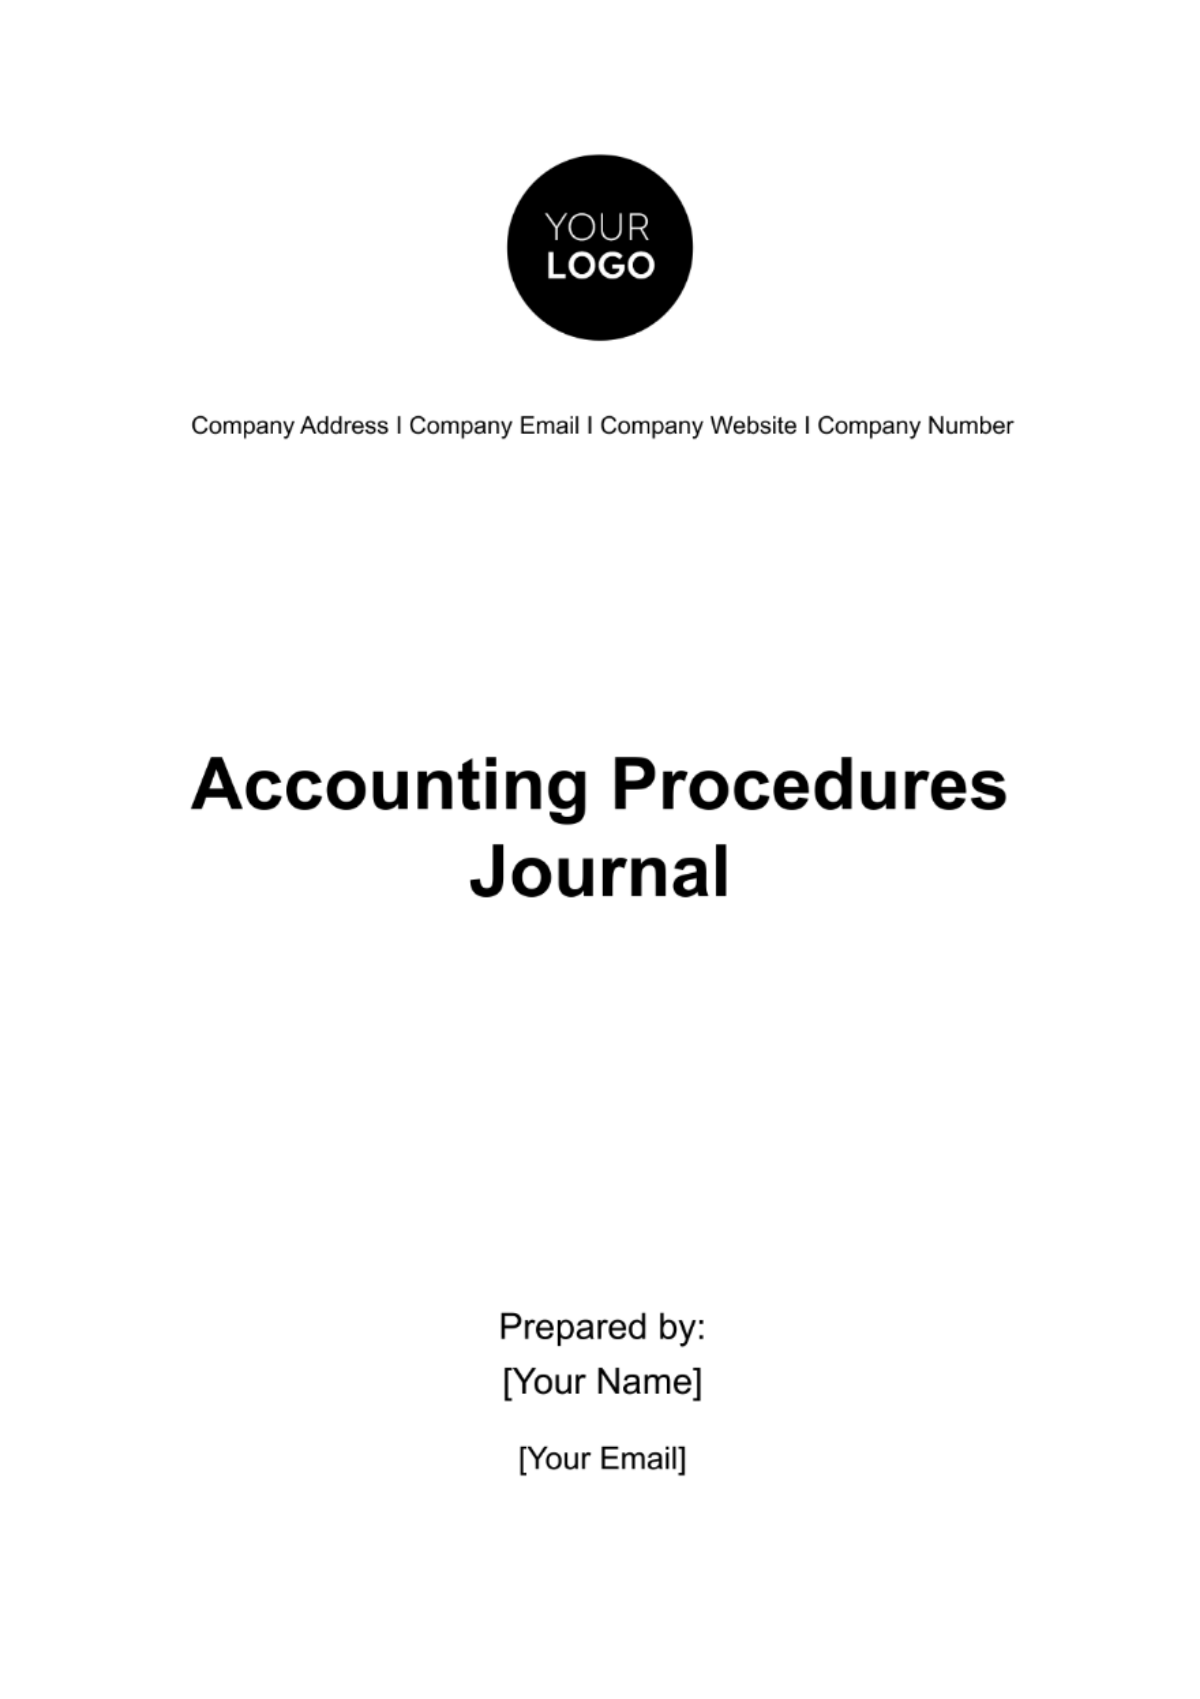 Accounting Procedures Journal Template